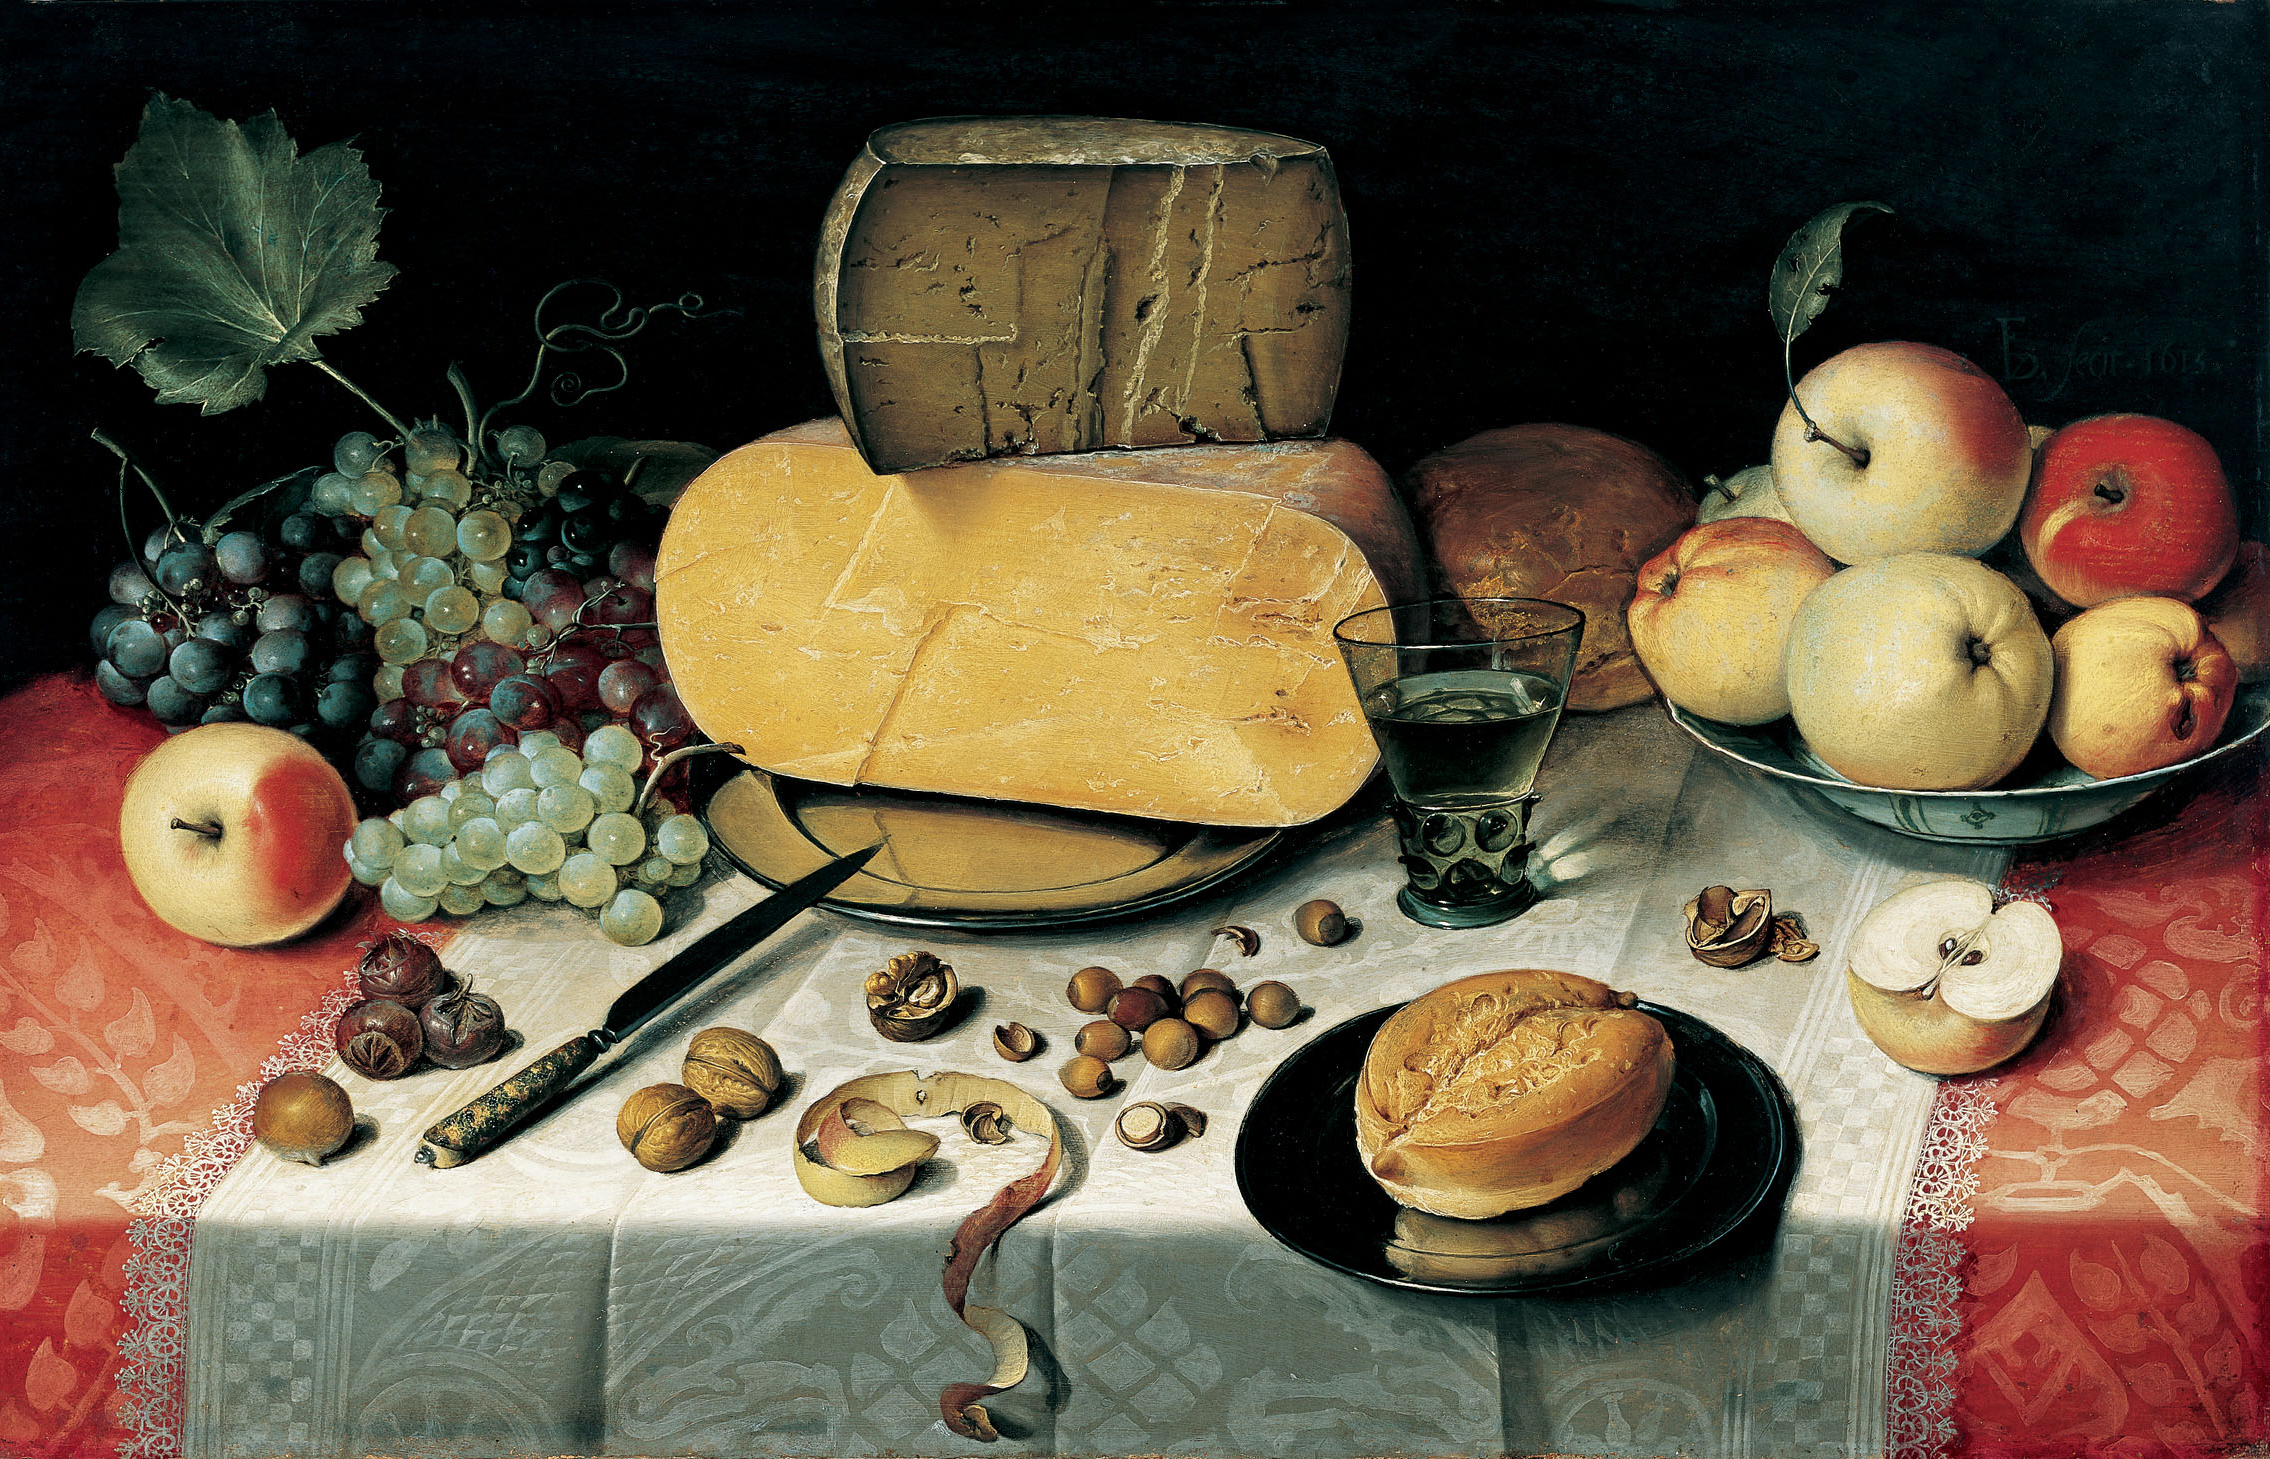 A 17th-century Dutch breakfast | Floris van Dyck (1575–1651), Still-Life with Fruit, Nuts and Cheese, 1610. Source: Wikipedia